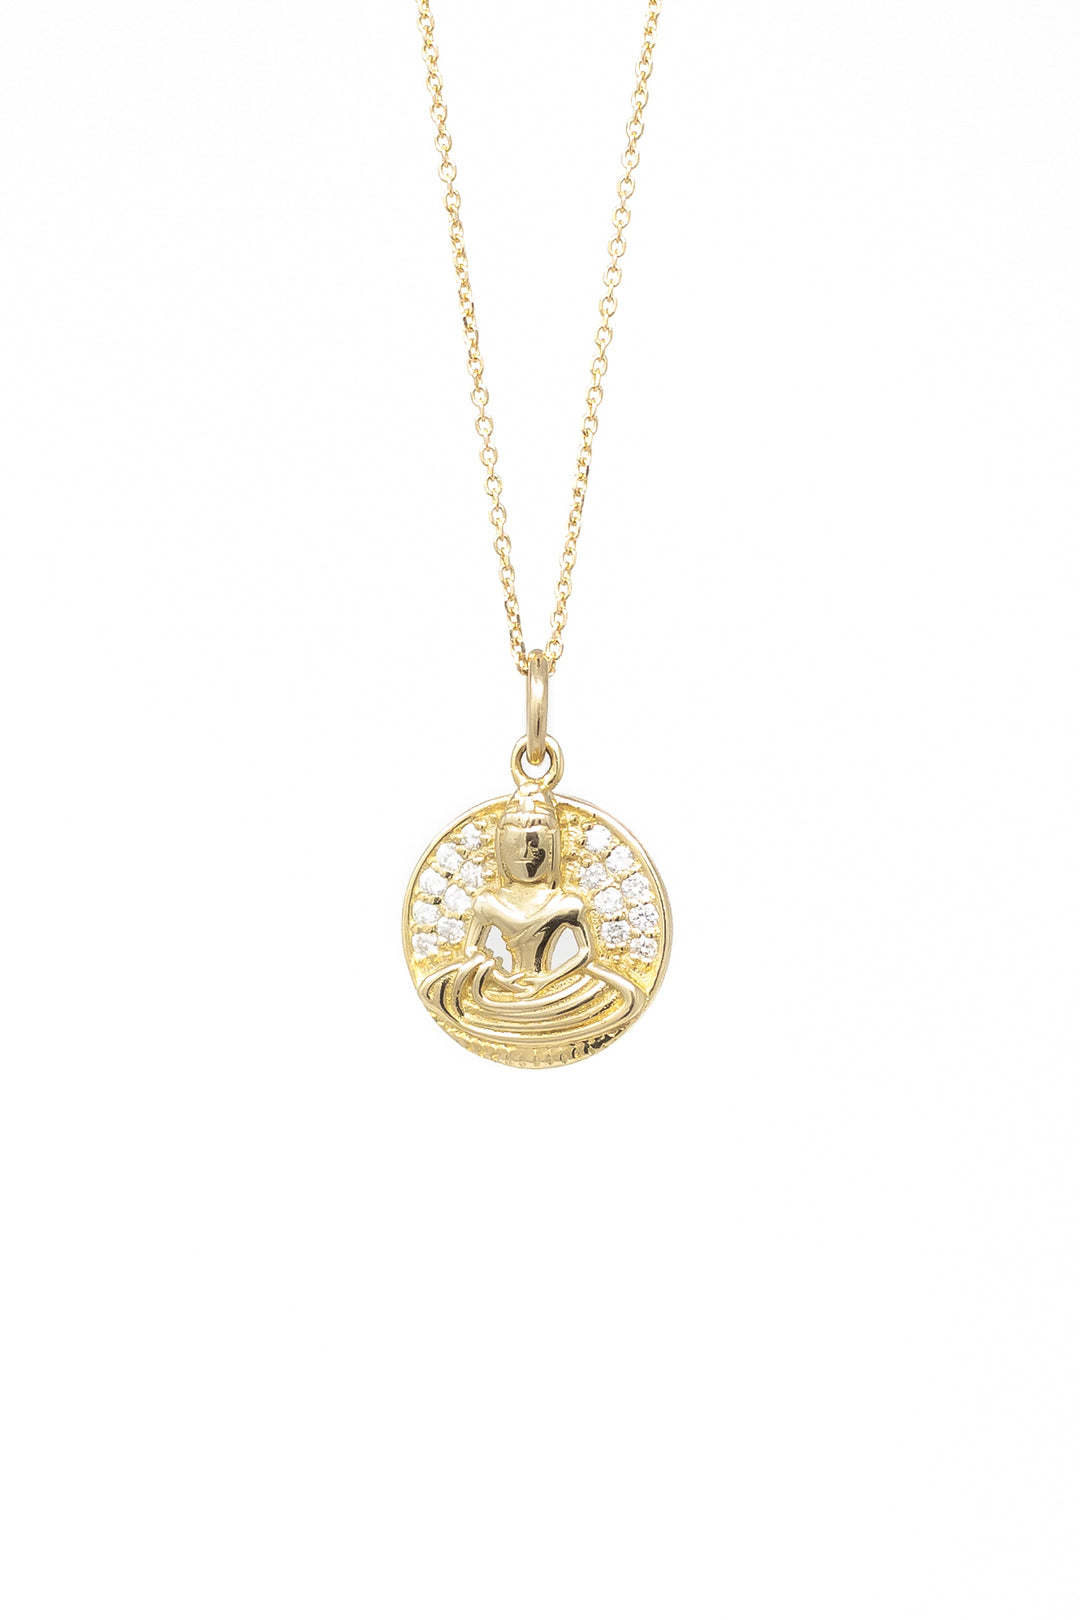 14K W DIA BUDDAH NECKLACE - Kingfisher Road - Online Boutique